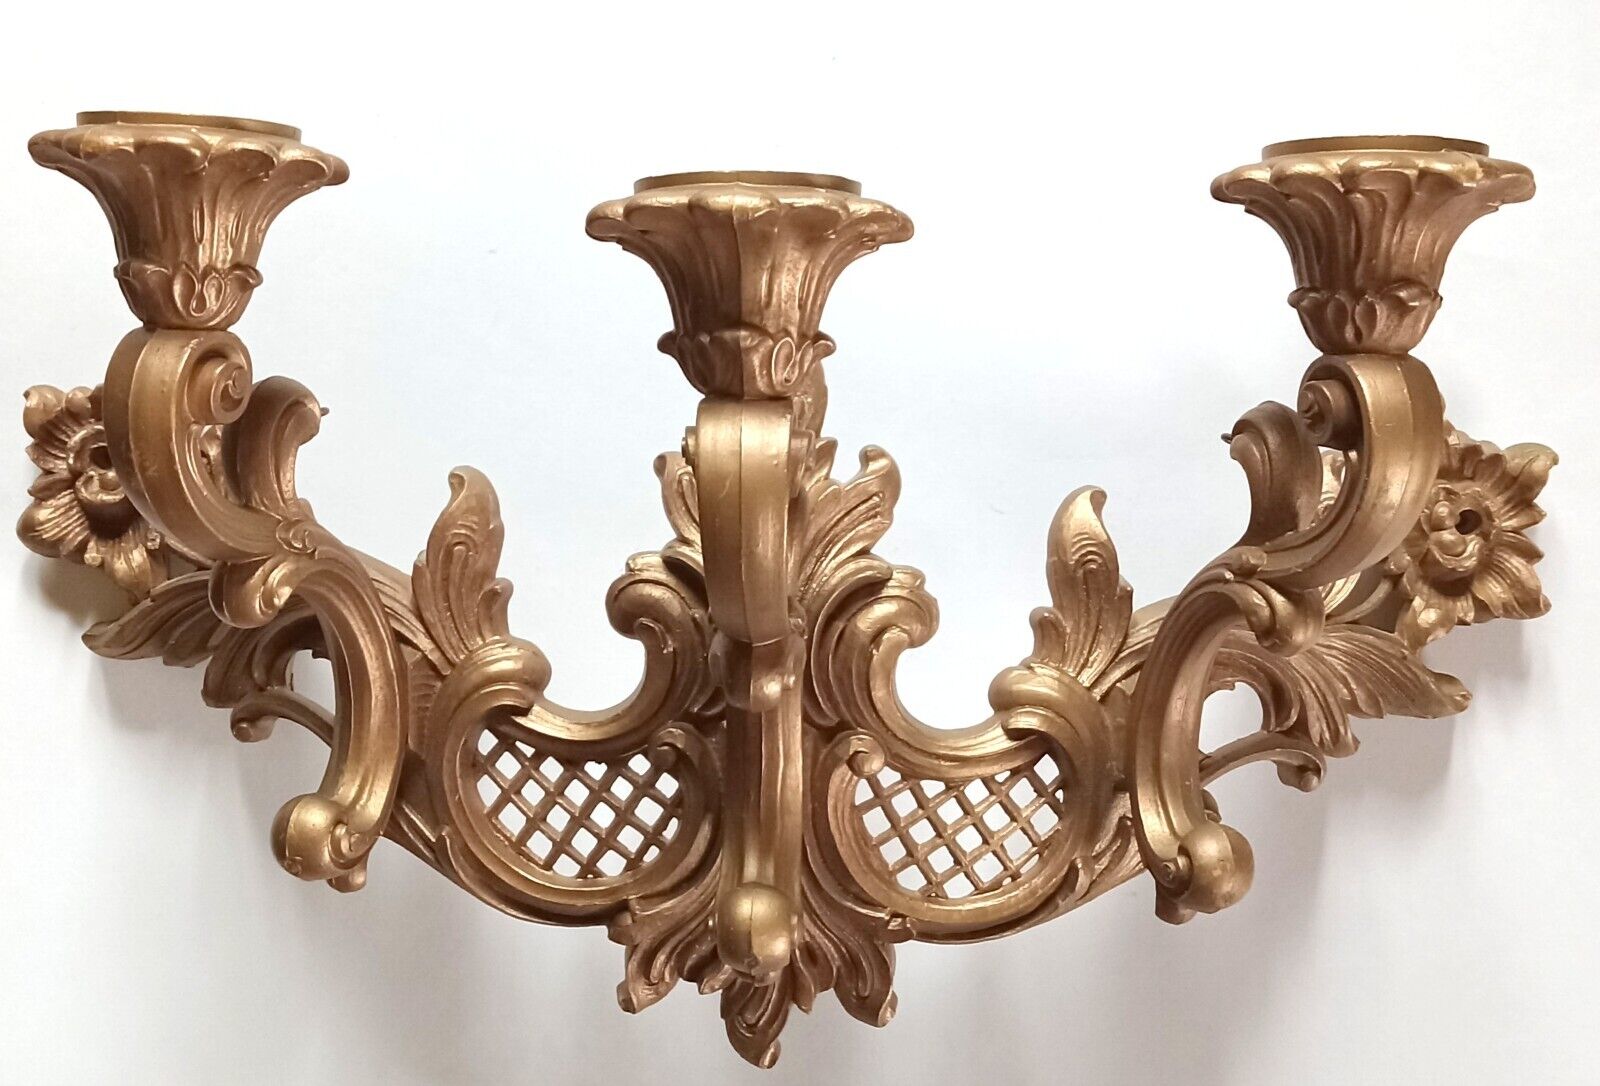 Vintage Homco Syroco Regency Candle Wall Sconce Gold French Country Wall Decor